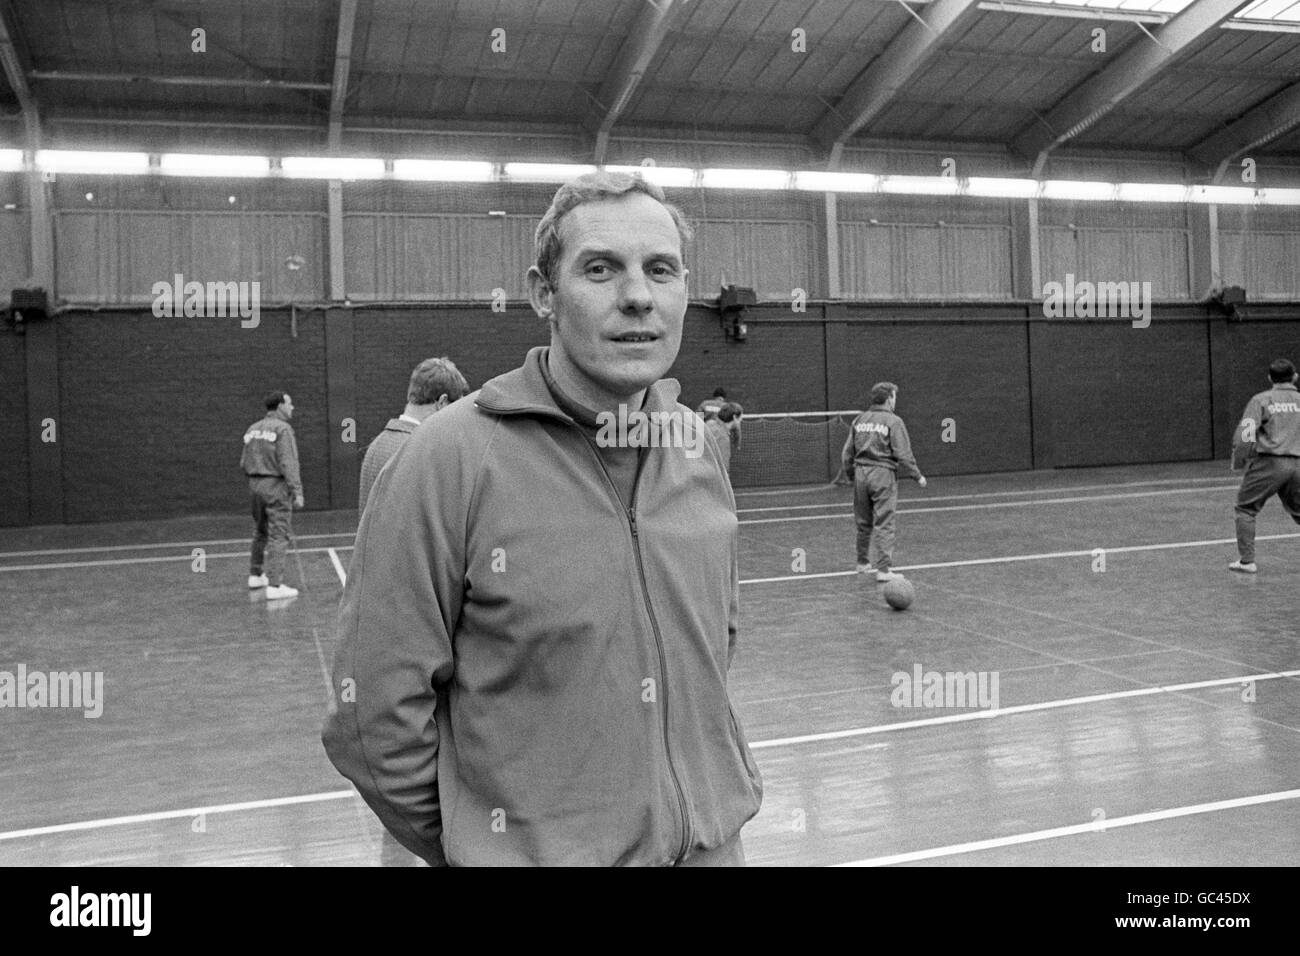 Soccer - Scotland Training - Largs, Scotland. Scotland Manager Bobby Brown posses for a photograph as his players train in the background. Stock Photo